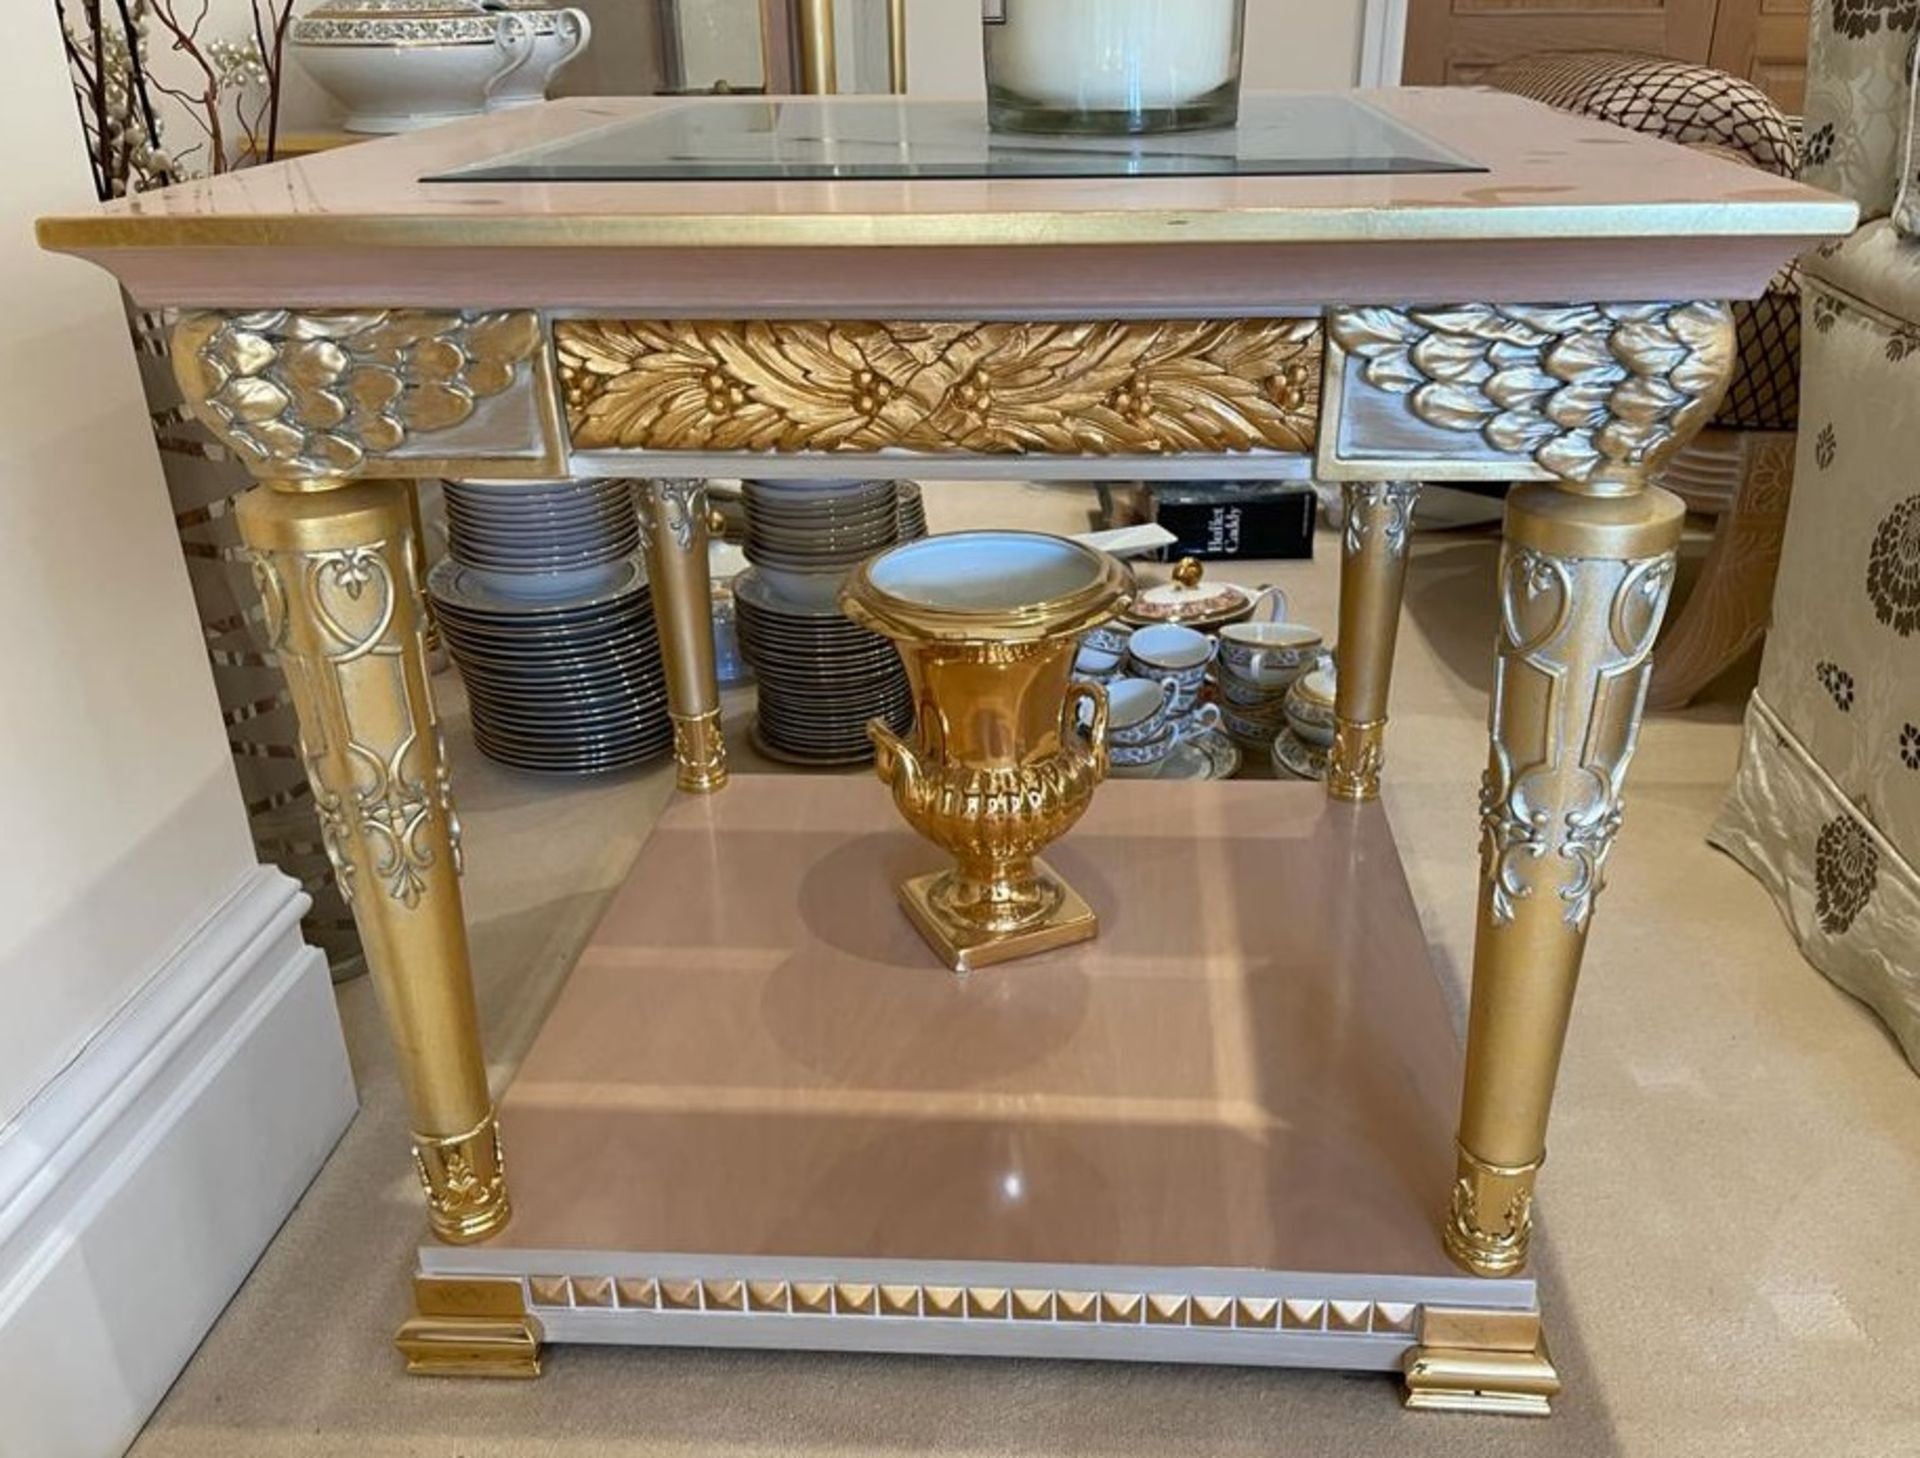 2 x Hand Carved Ornate Side Tables Complimented With Birchwood Veneer, Golden Pillar Legs, Carved - Image 5 of 13